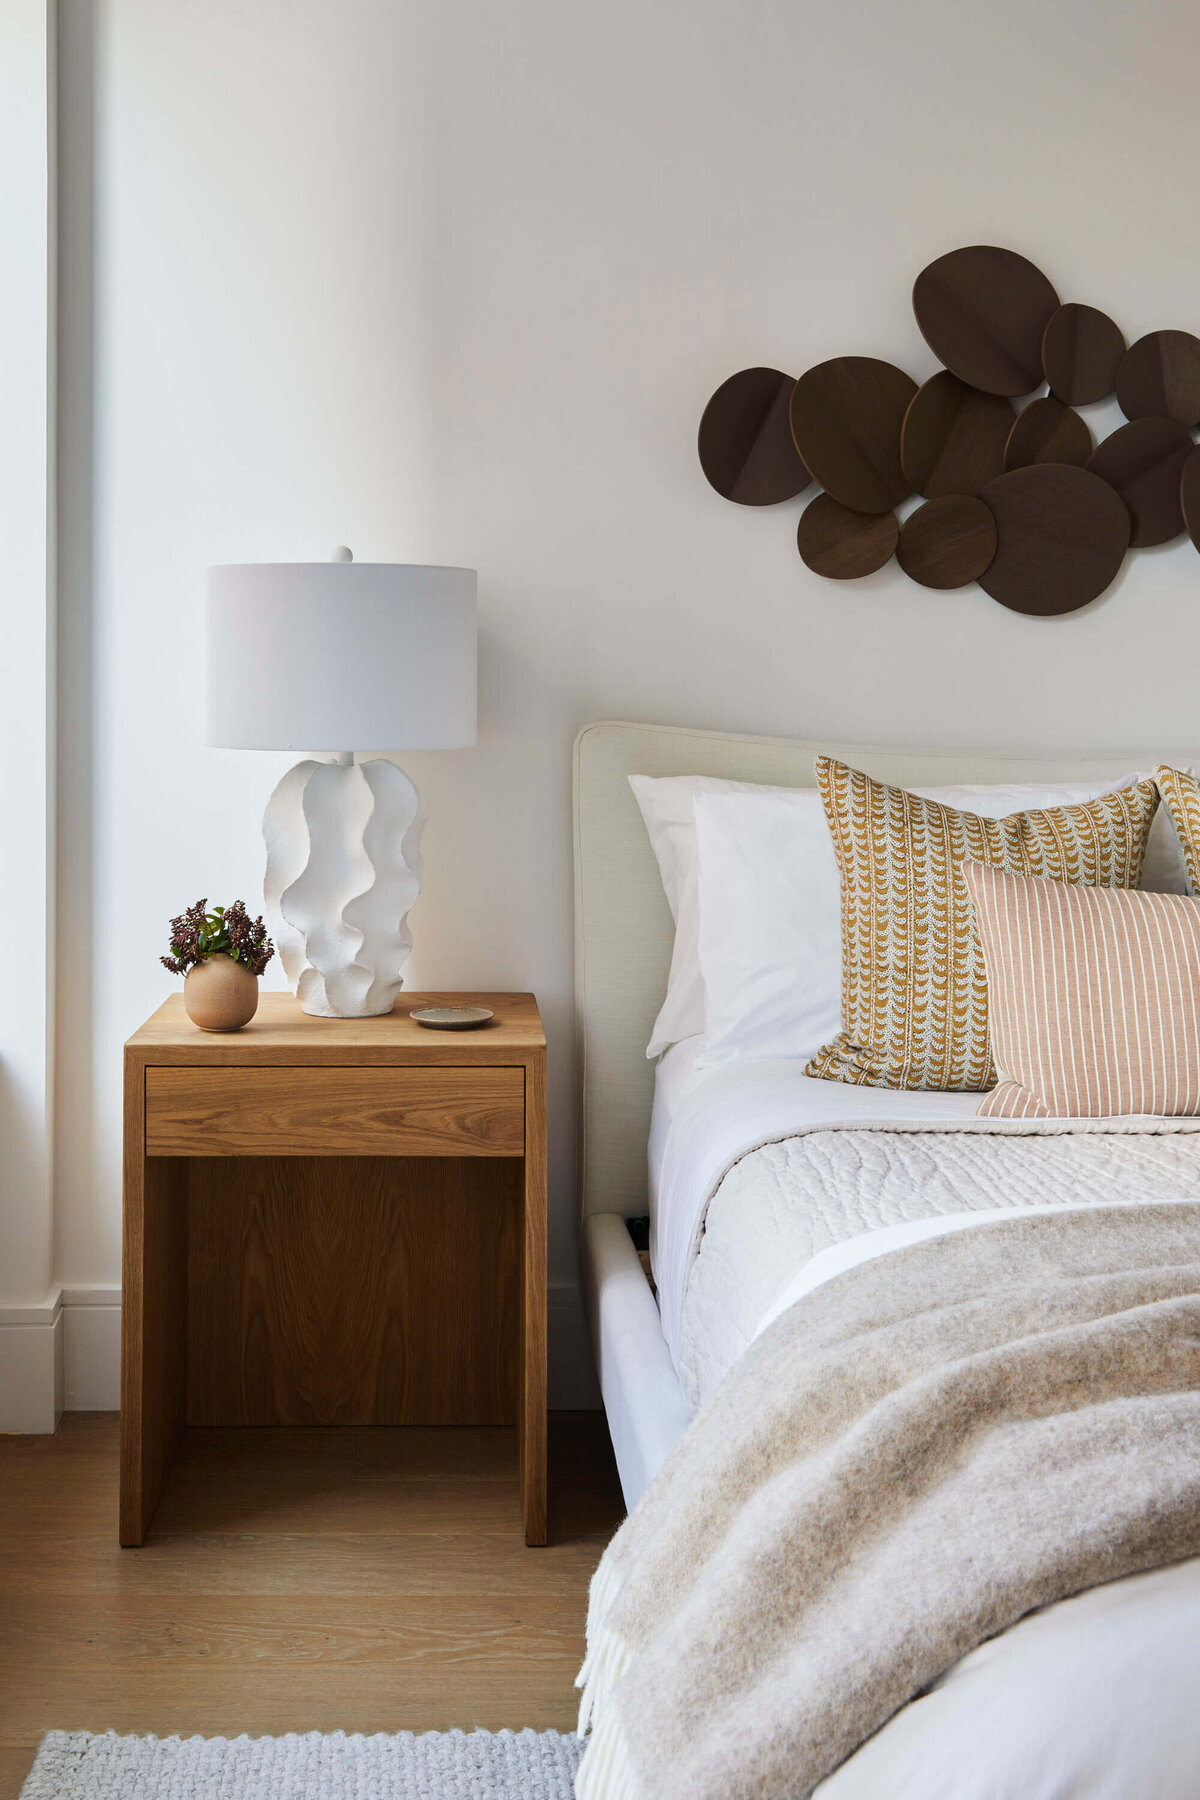 Neutral creams and white bedding with wooden side table and white lamp